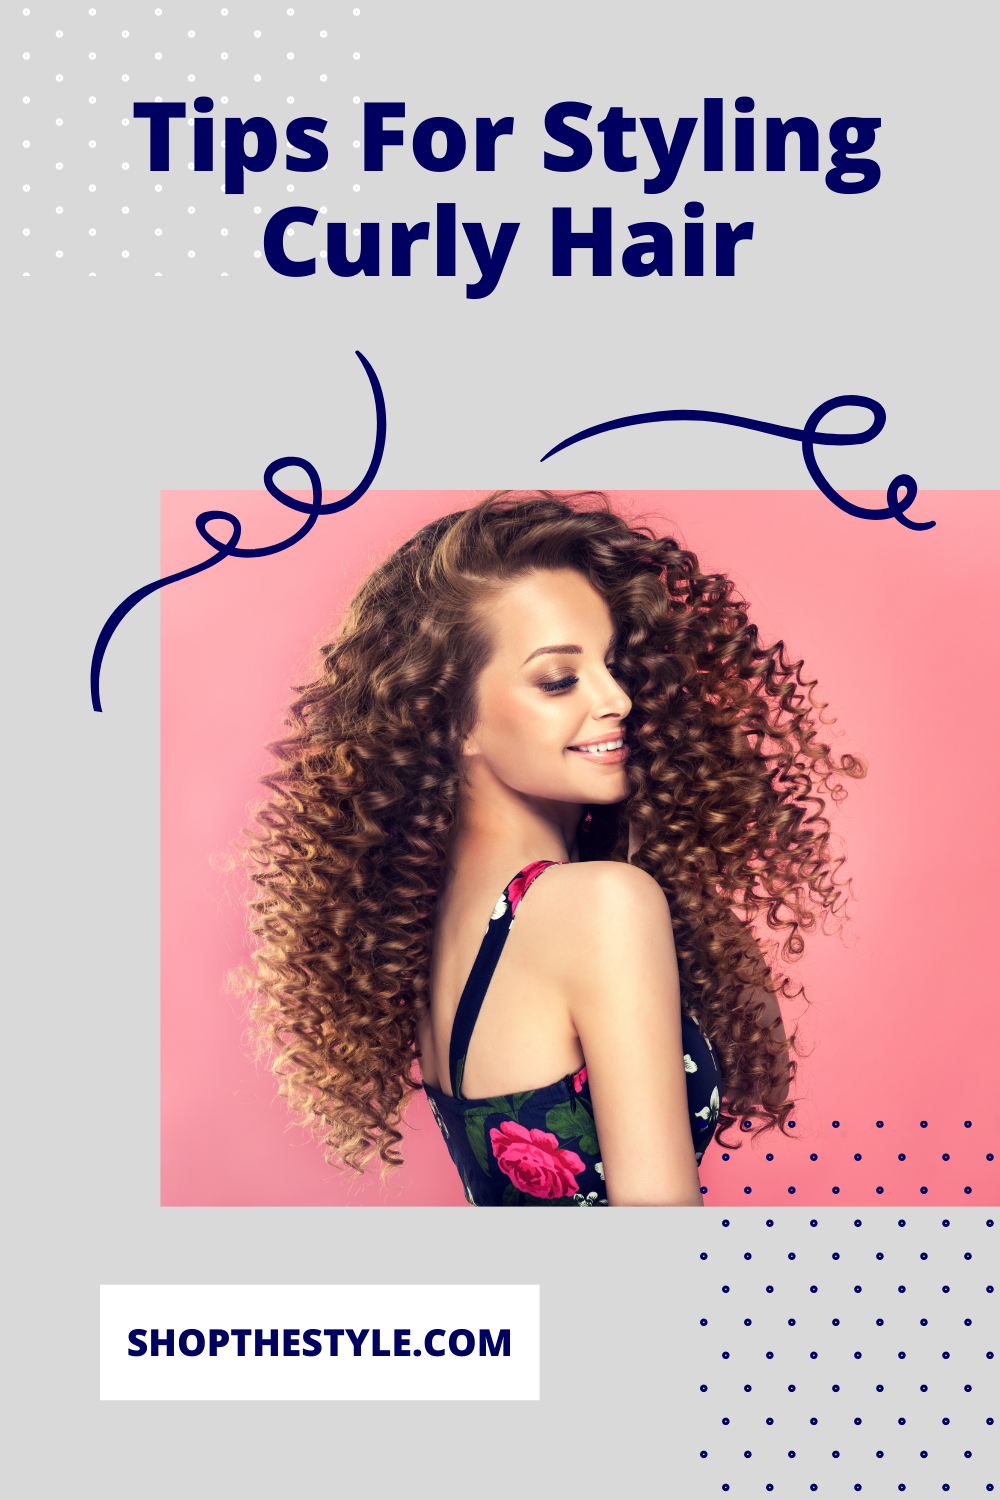 Tips For Styling Curly Hair